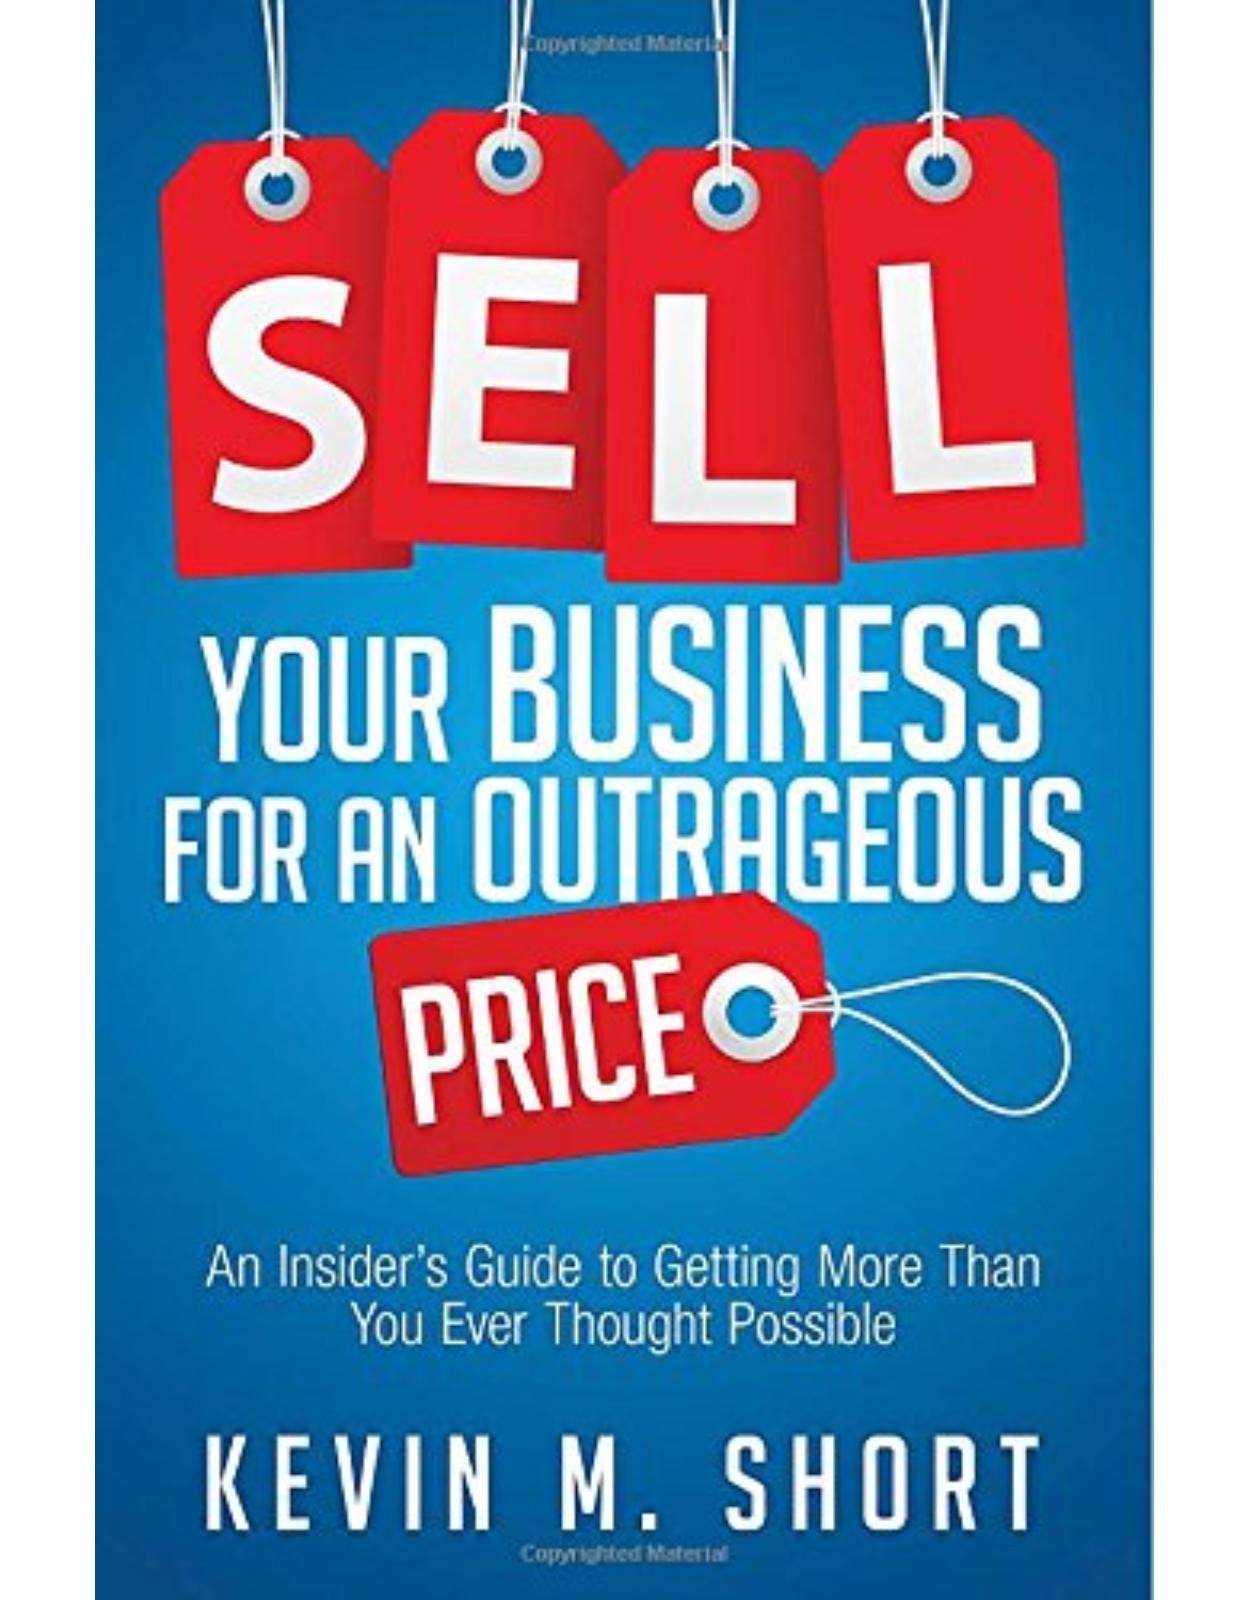 Sell Your Business for an Outrageous Price: An Insider's Guide to Getting More Than You Ever Thought Possible 